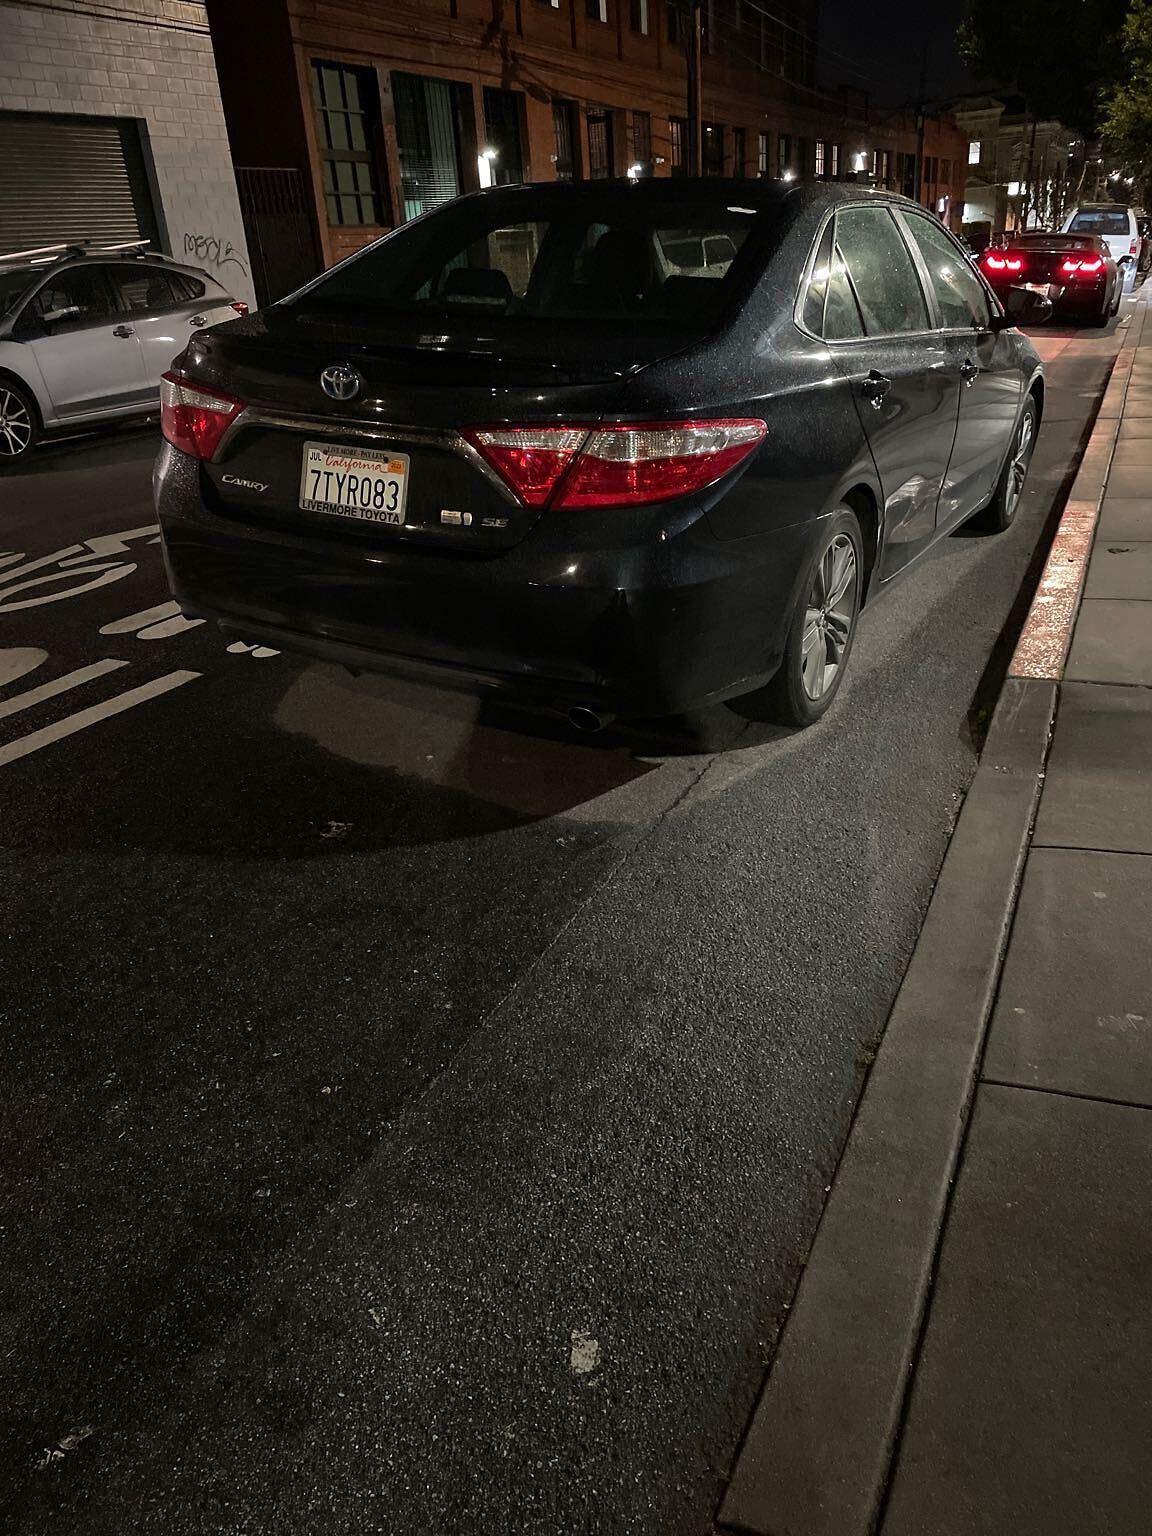 Photo of car in the street with license plate 7TYR083 in California